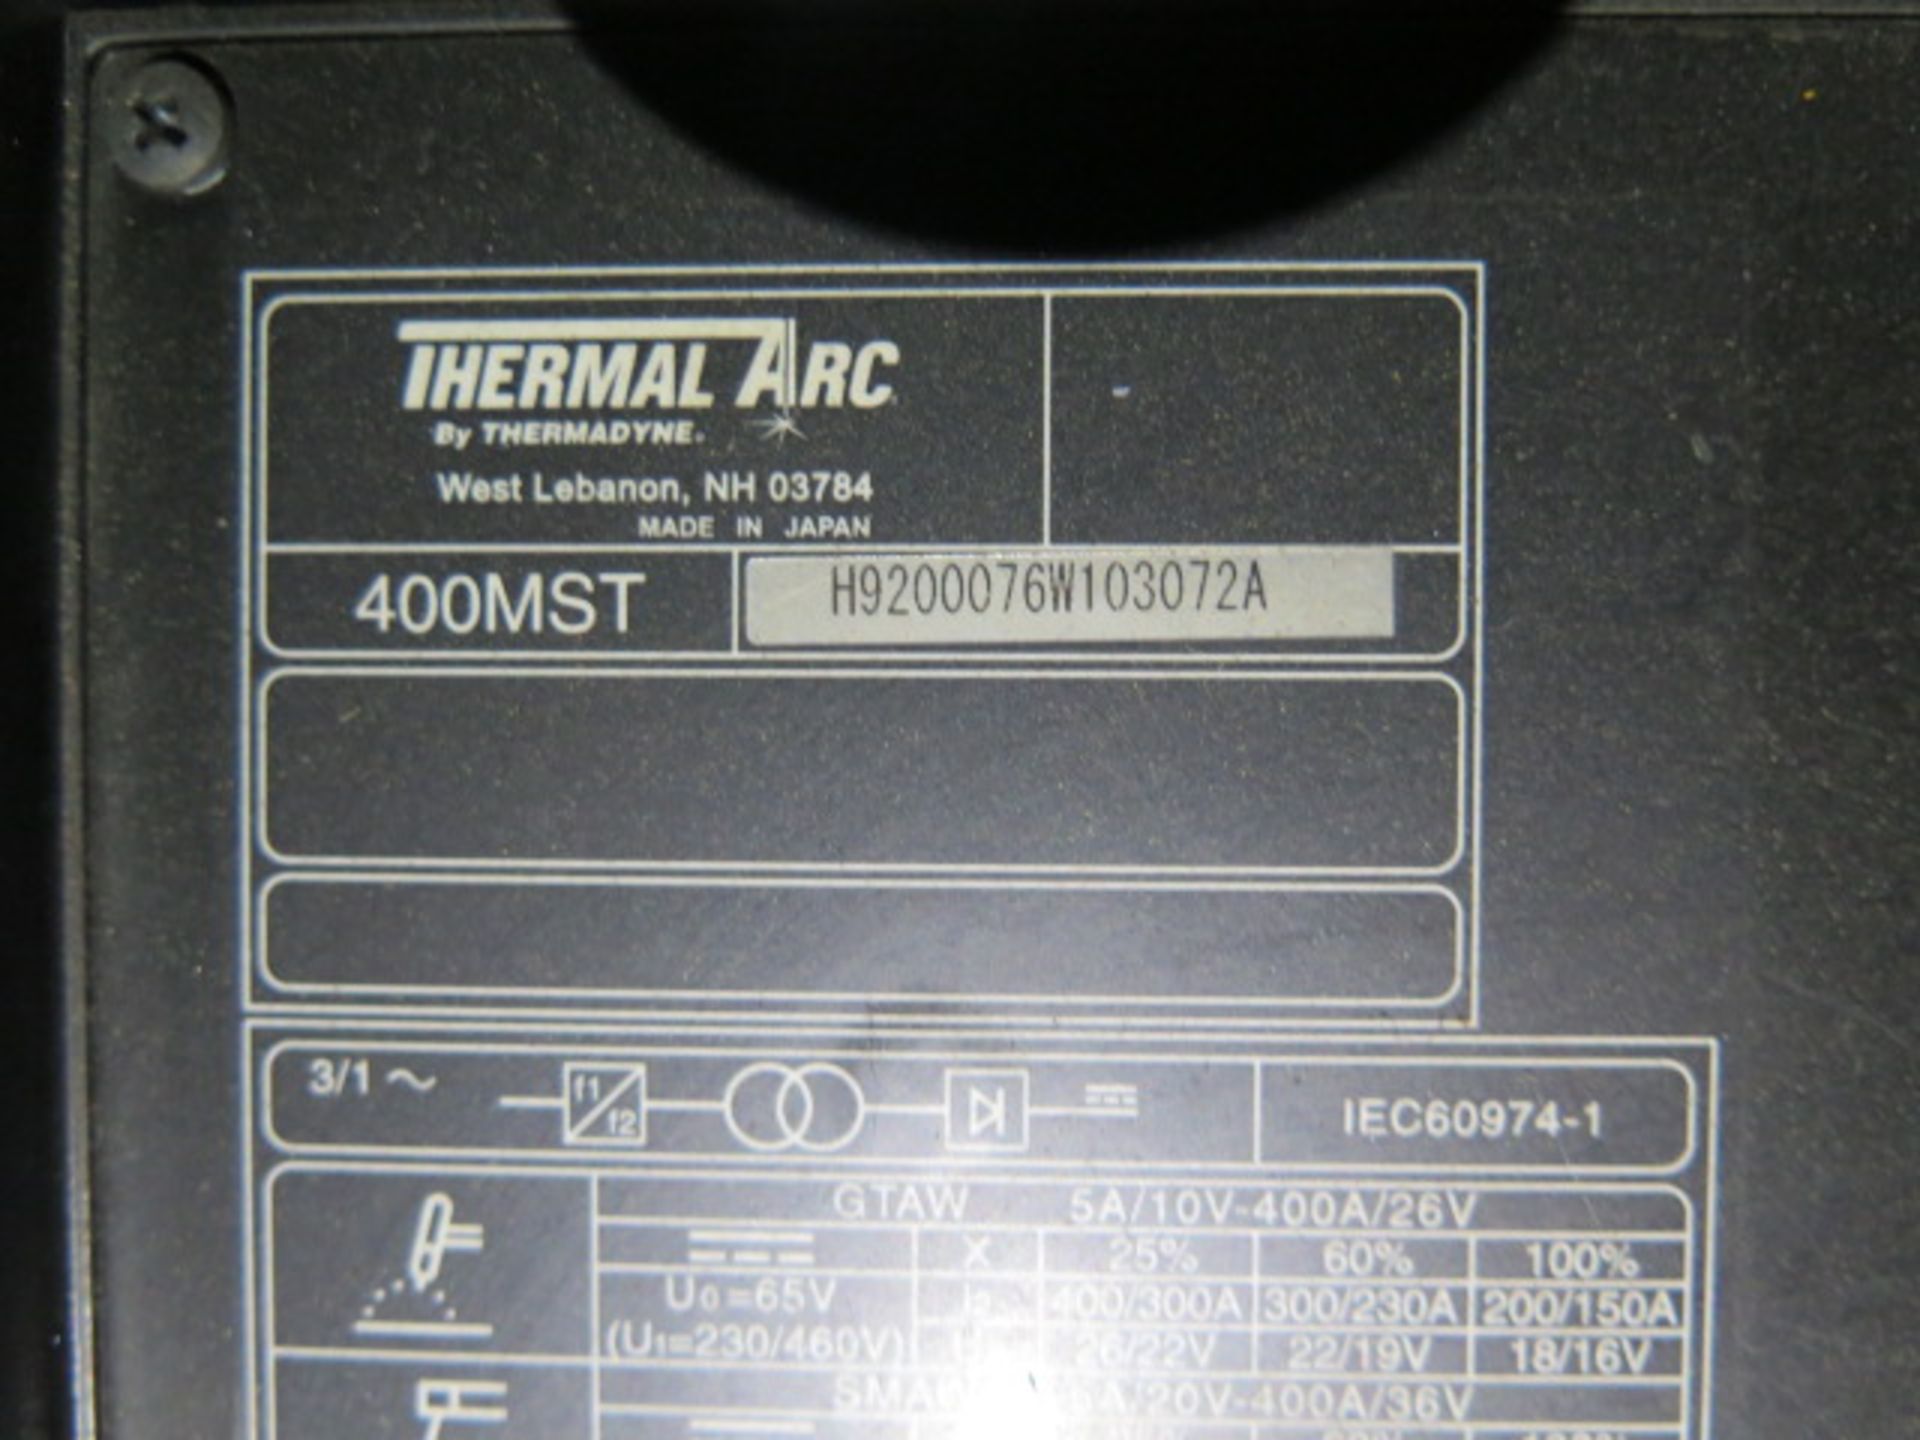 Thermal Arc 400MST Arc Welding Power Source w/ VA2000 Wire Feed (SOLD AS-IS - NO WARRANTY) - Image 8 of 8